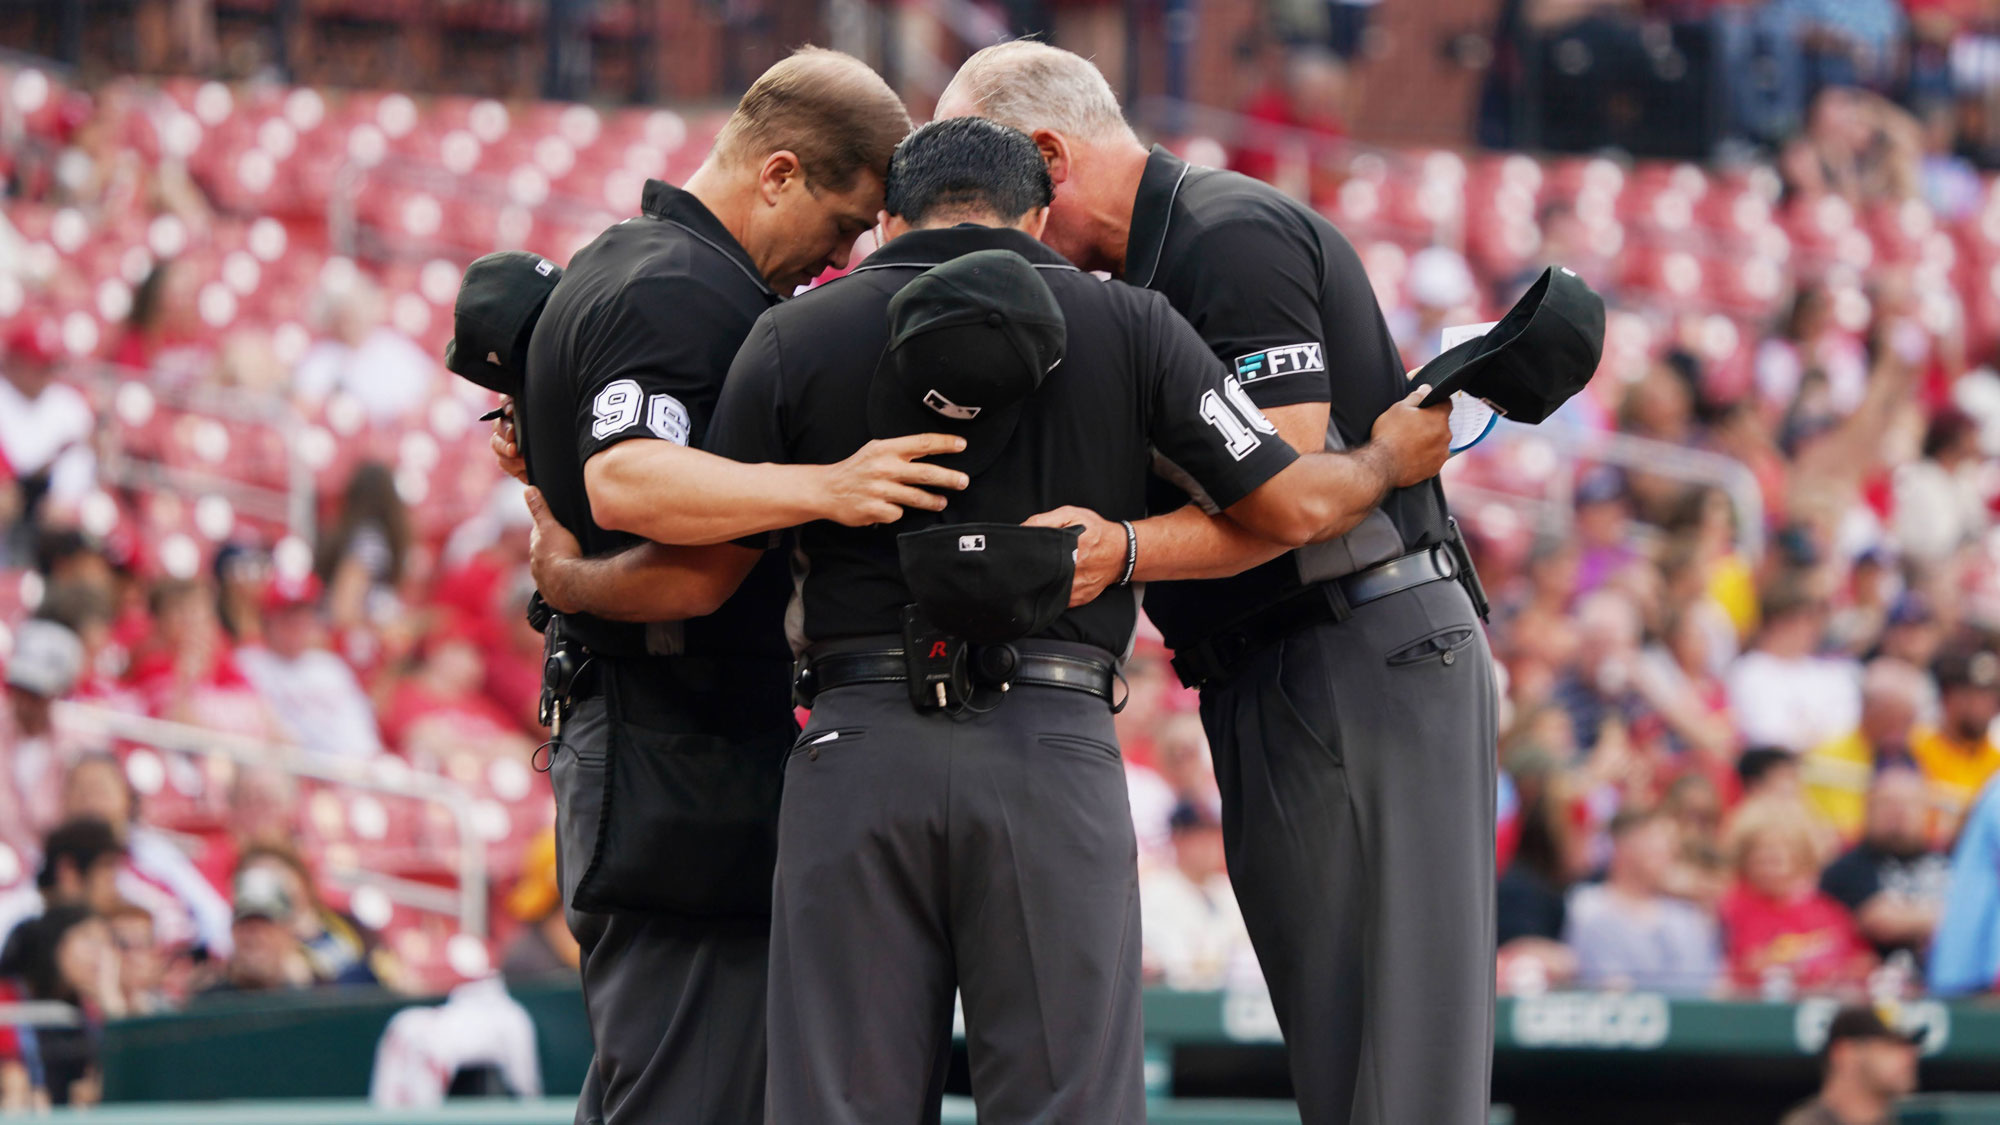 Chris and fellow umpires in prayer before starting a Major League game.